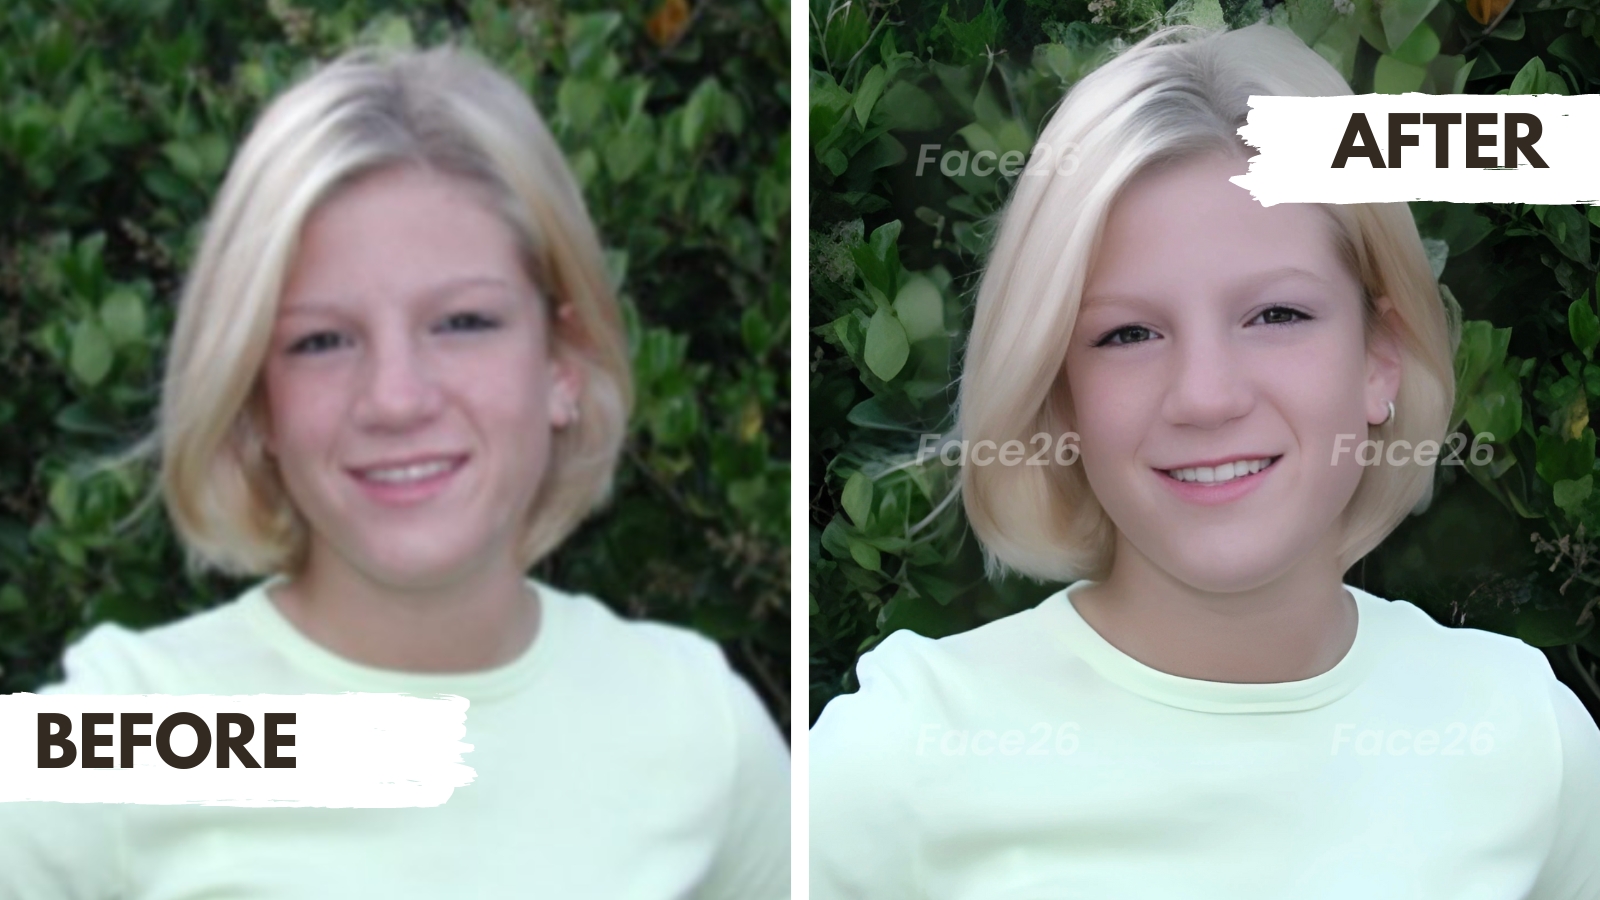 How to Make an Old Photo Clearer